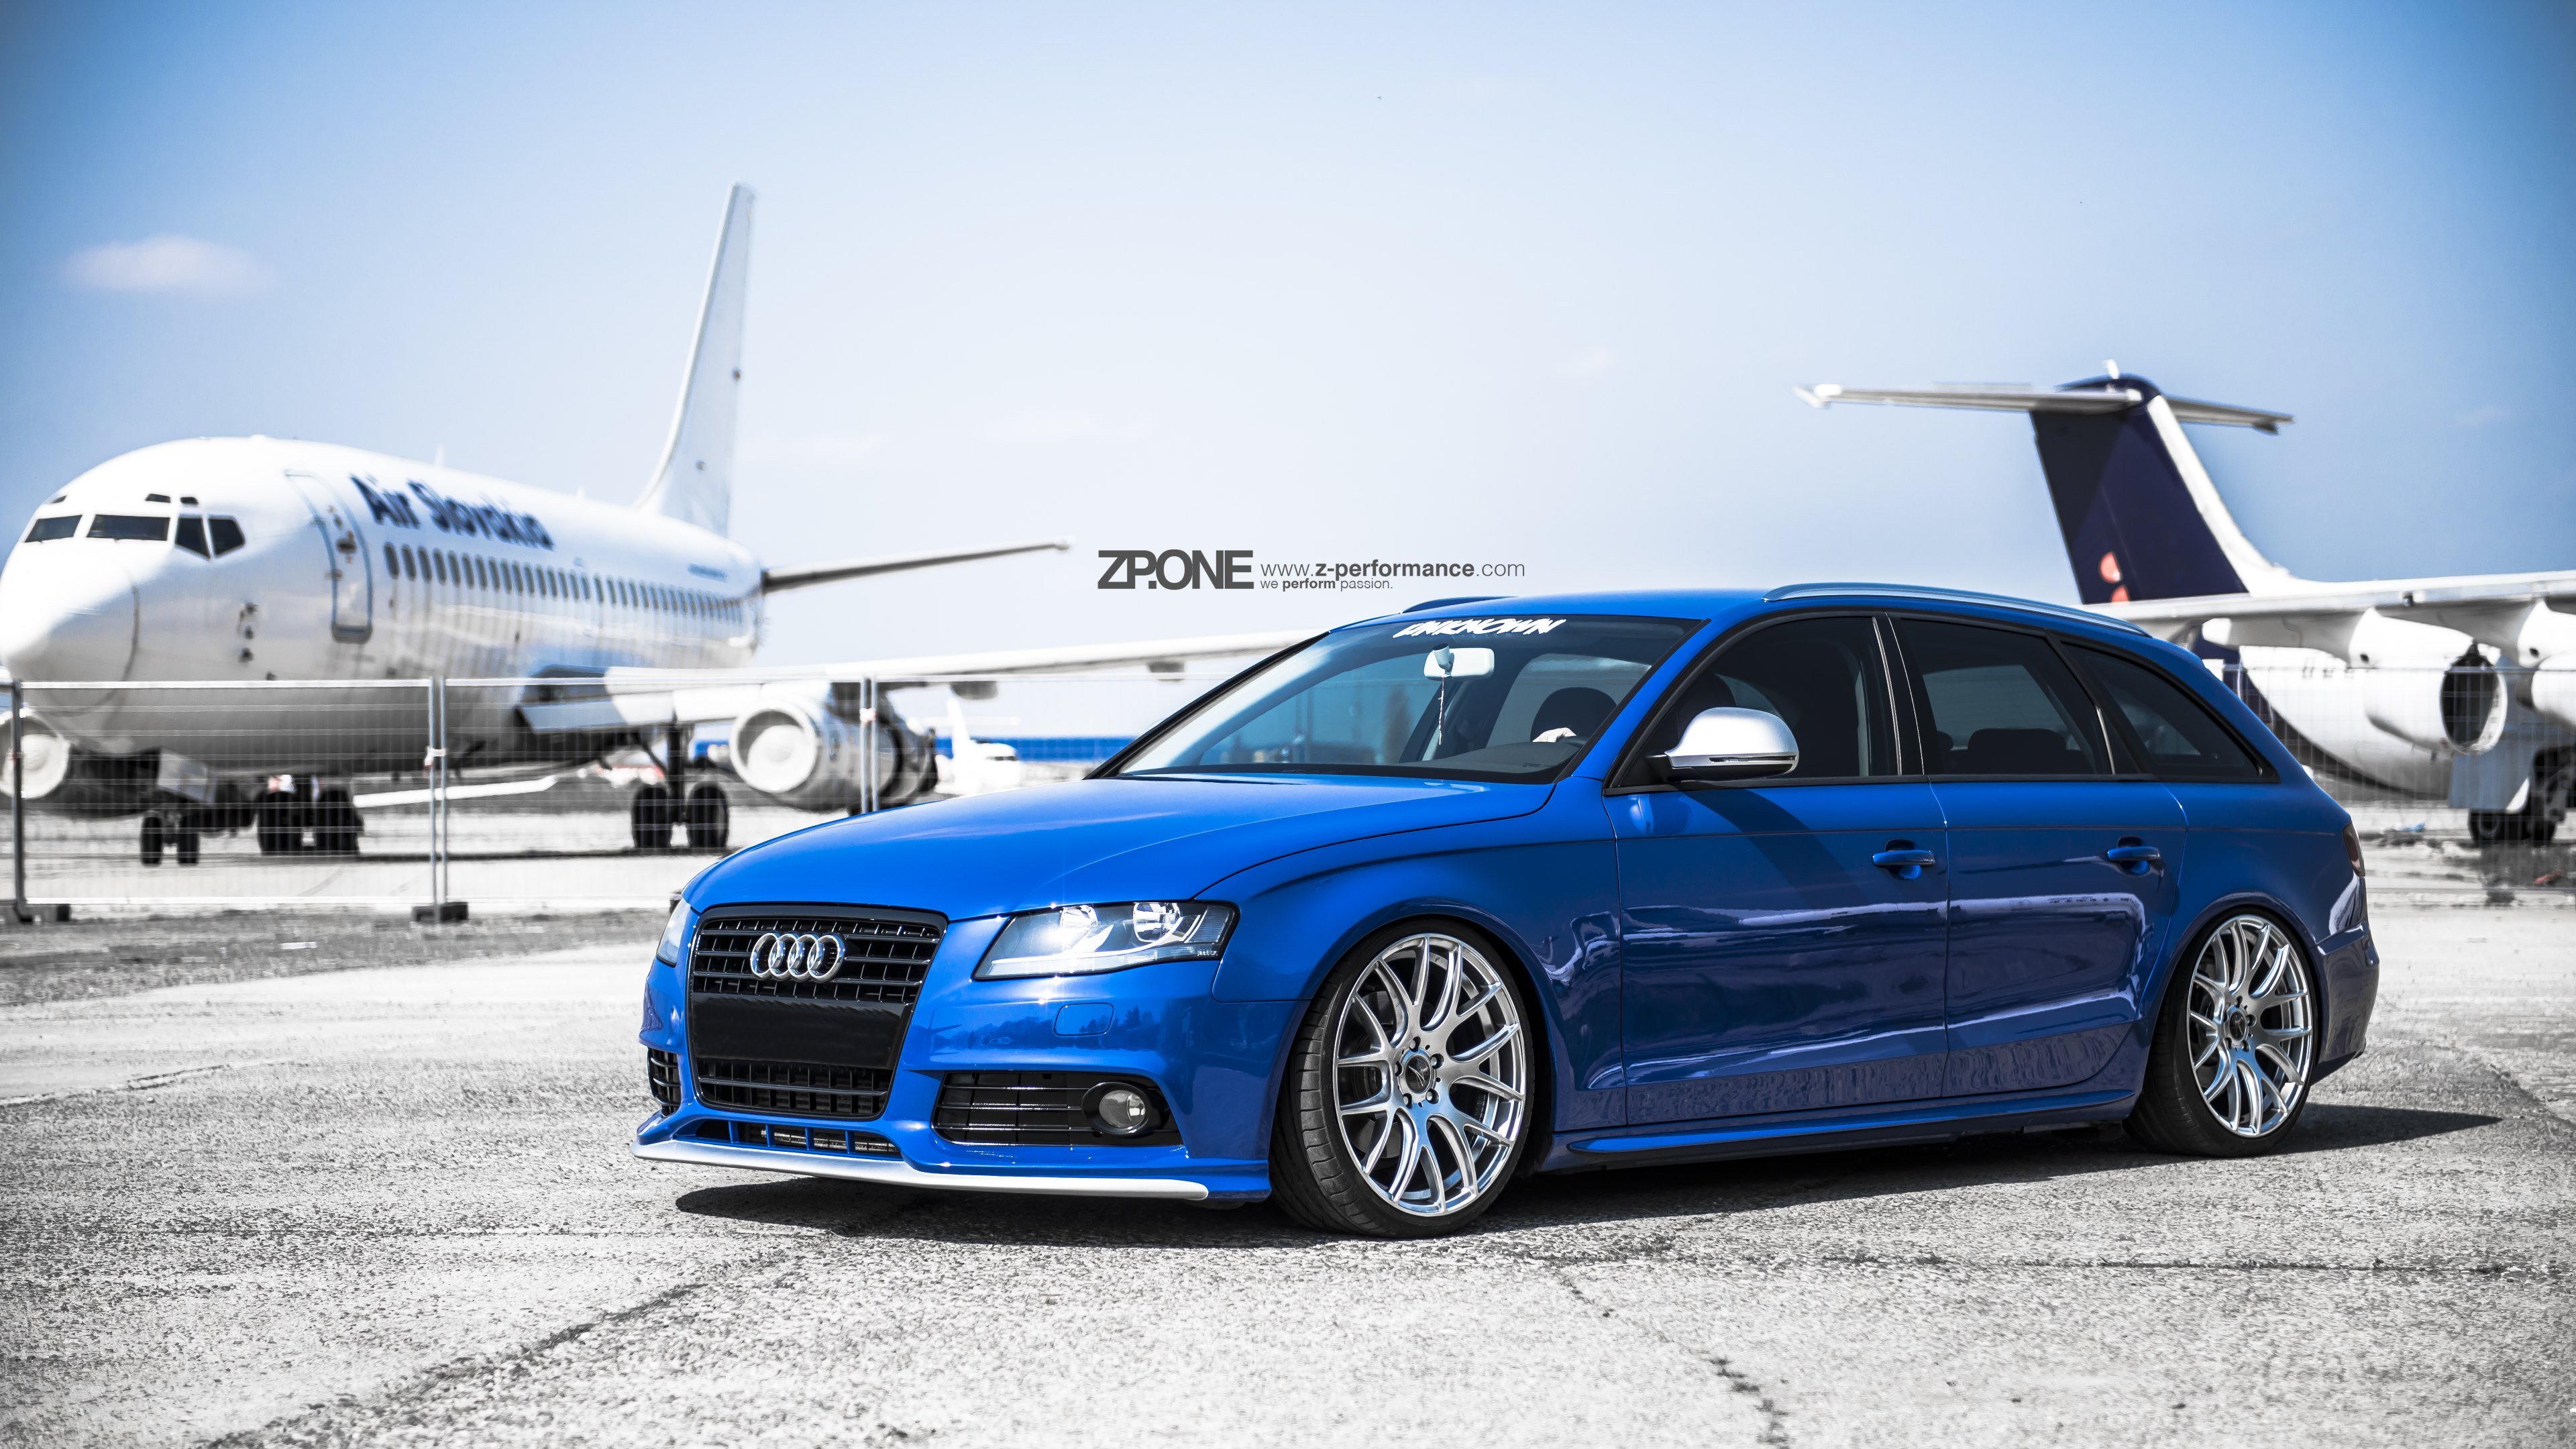 Audi A4 Car Wallpapers For Mobile